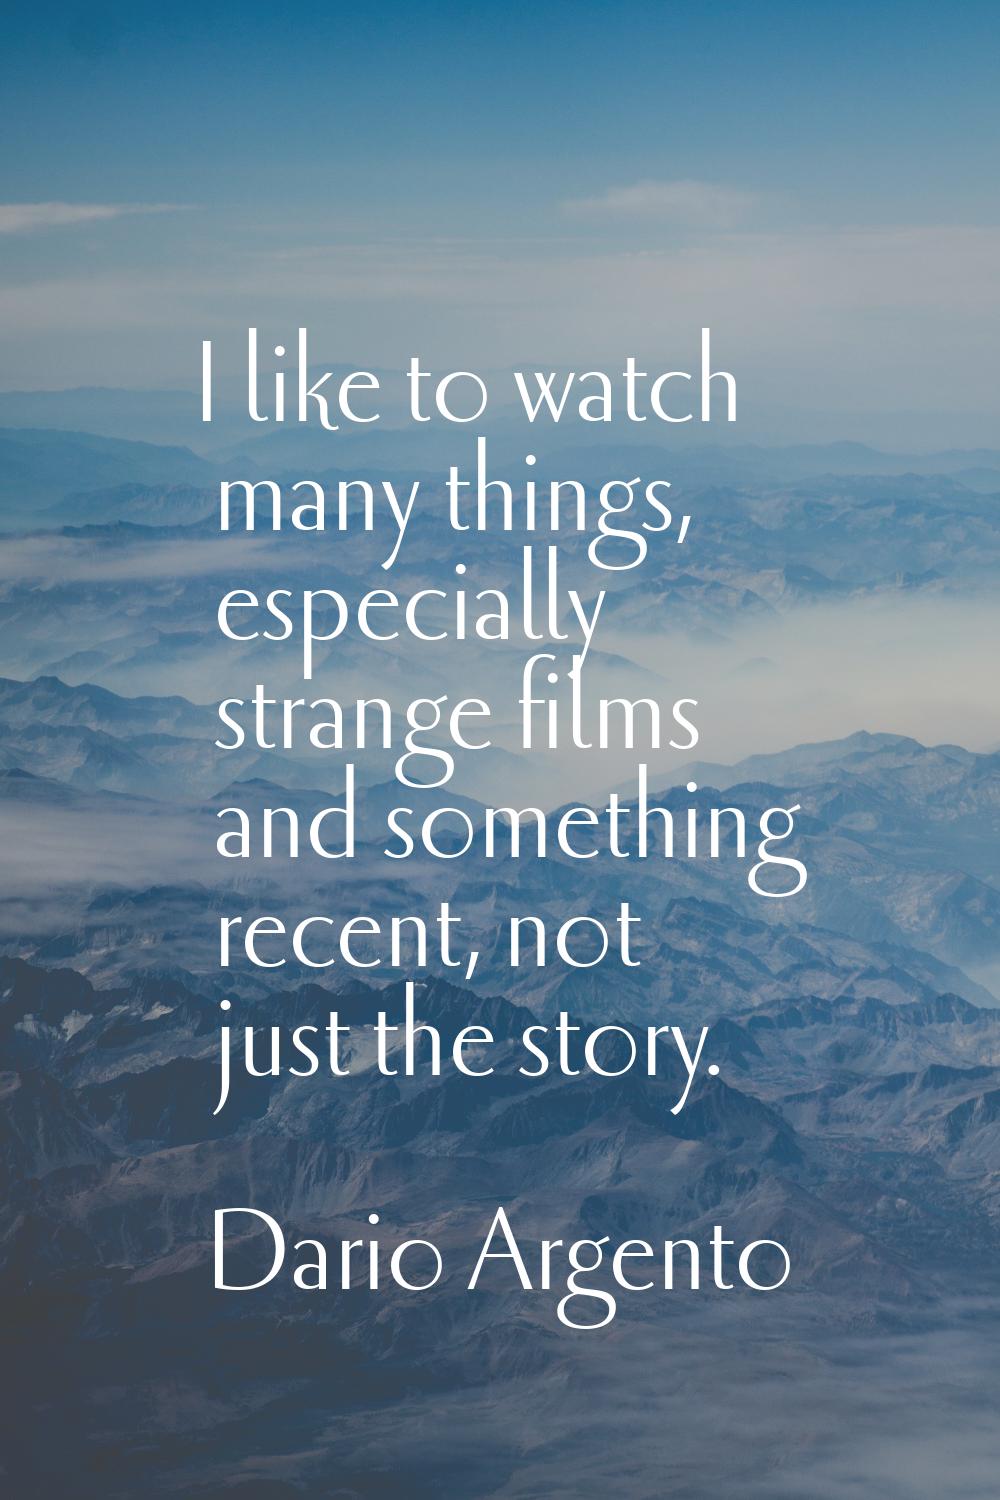 I like to watch many things, especially strange films and something recent, not just the story.